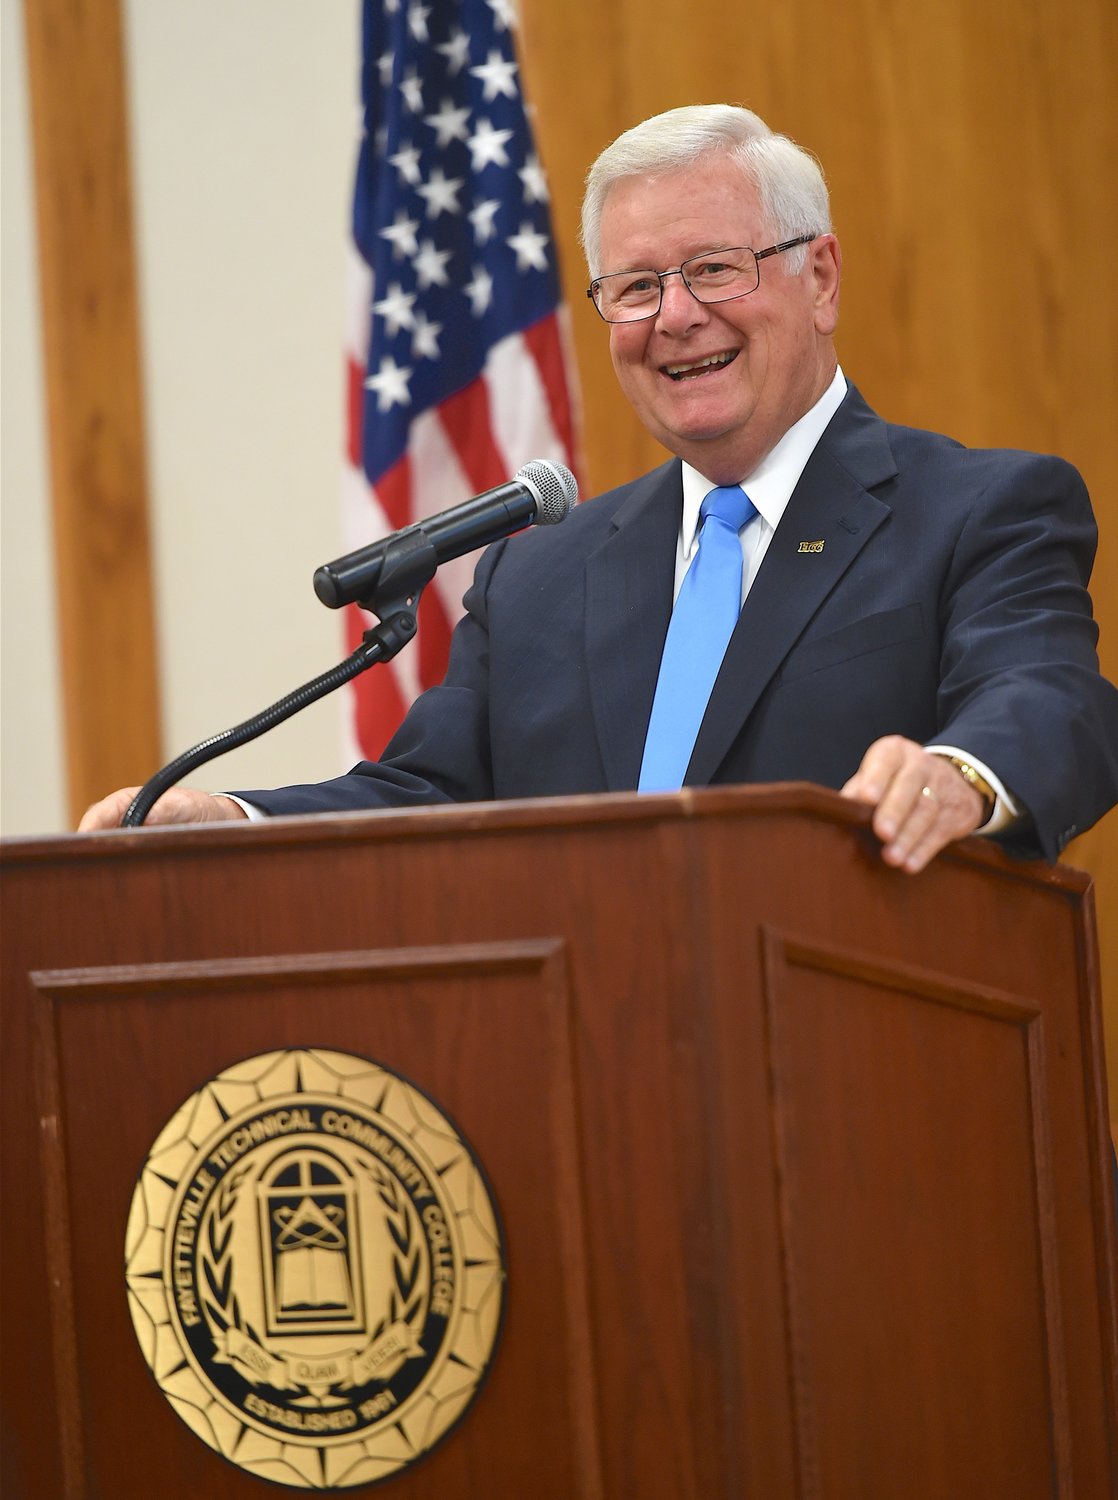 Larry Keen, president of Fayetteville Technical Community College, on Tuesday announced his retirement effective Jan. 1, 2023.